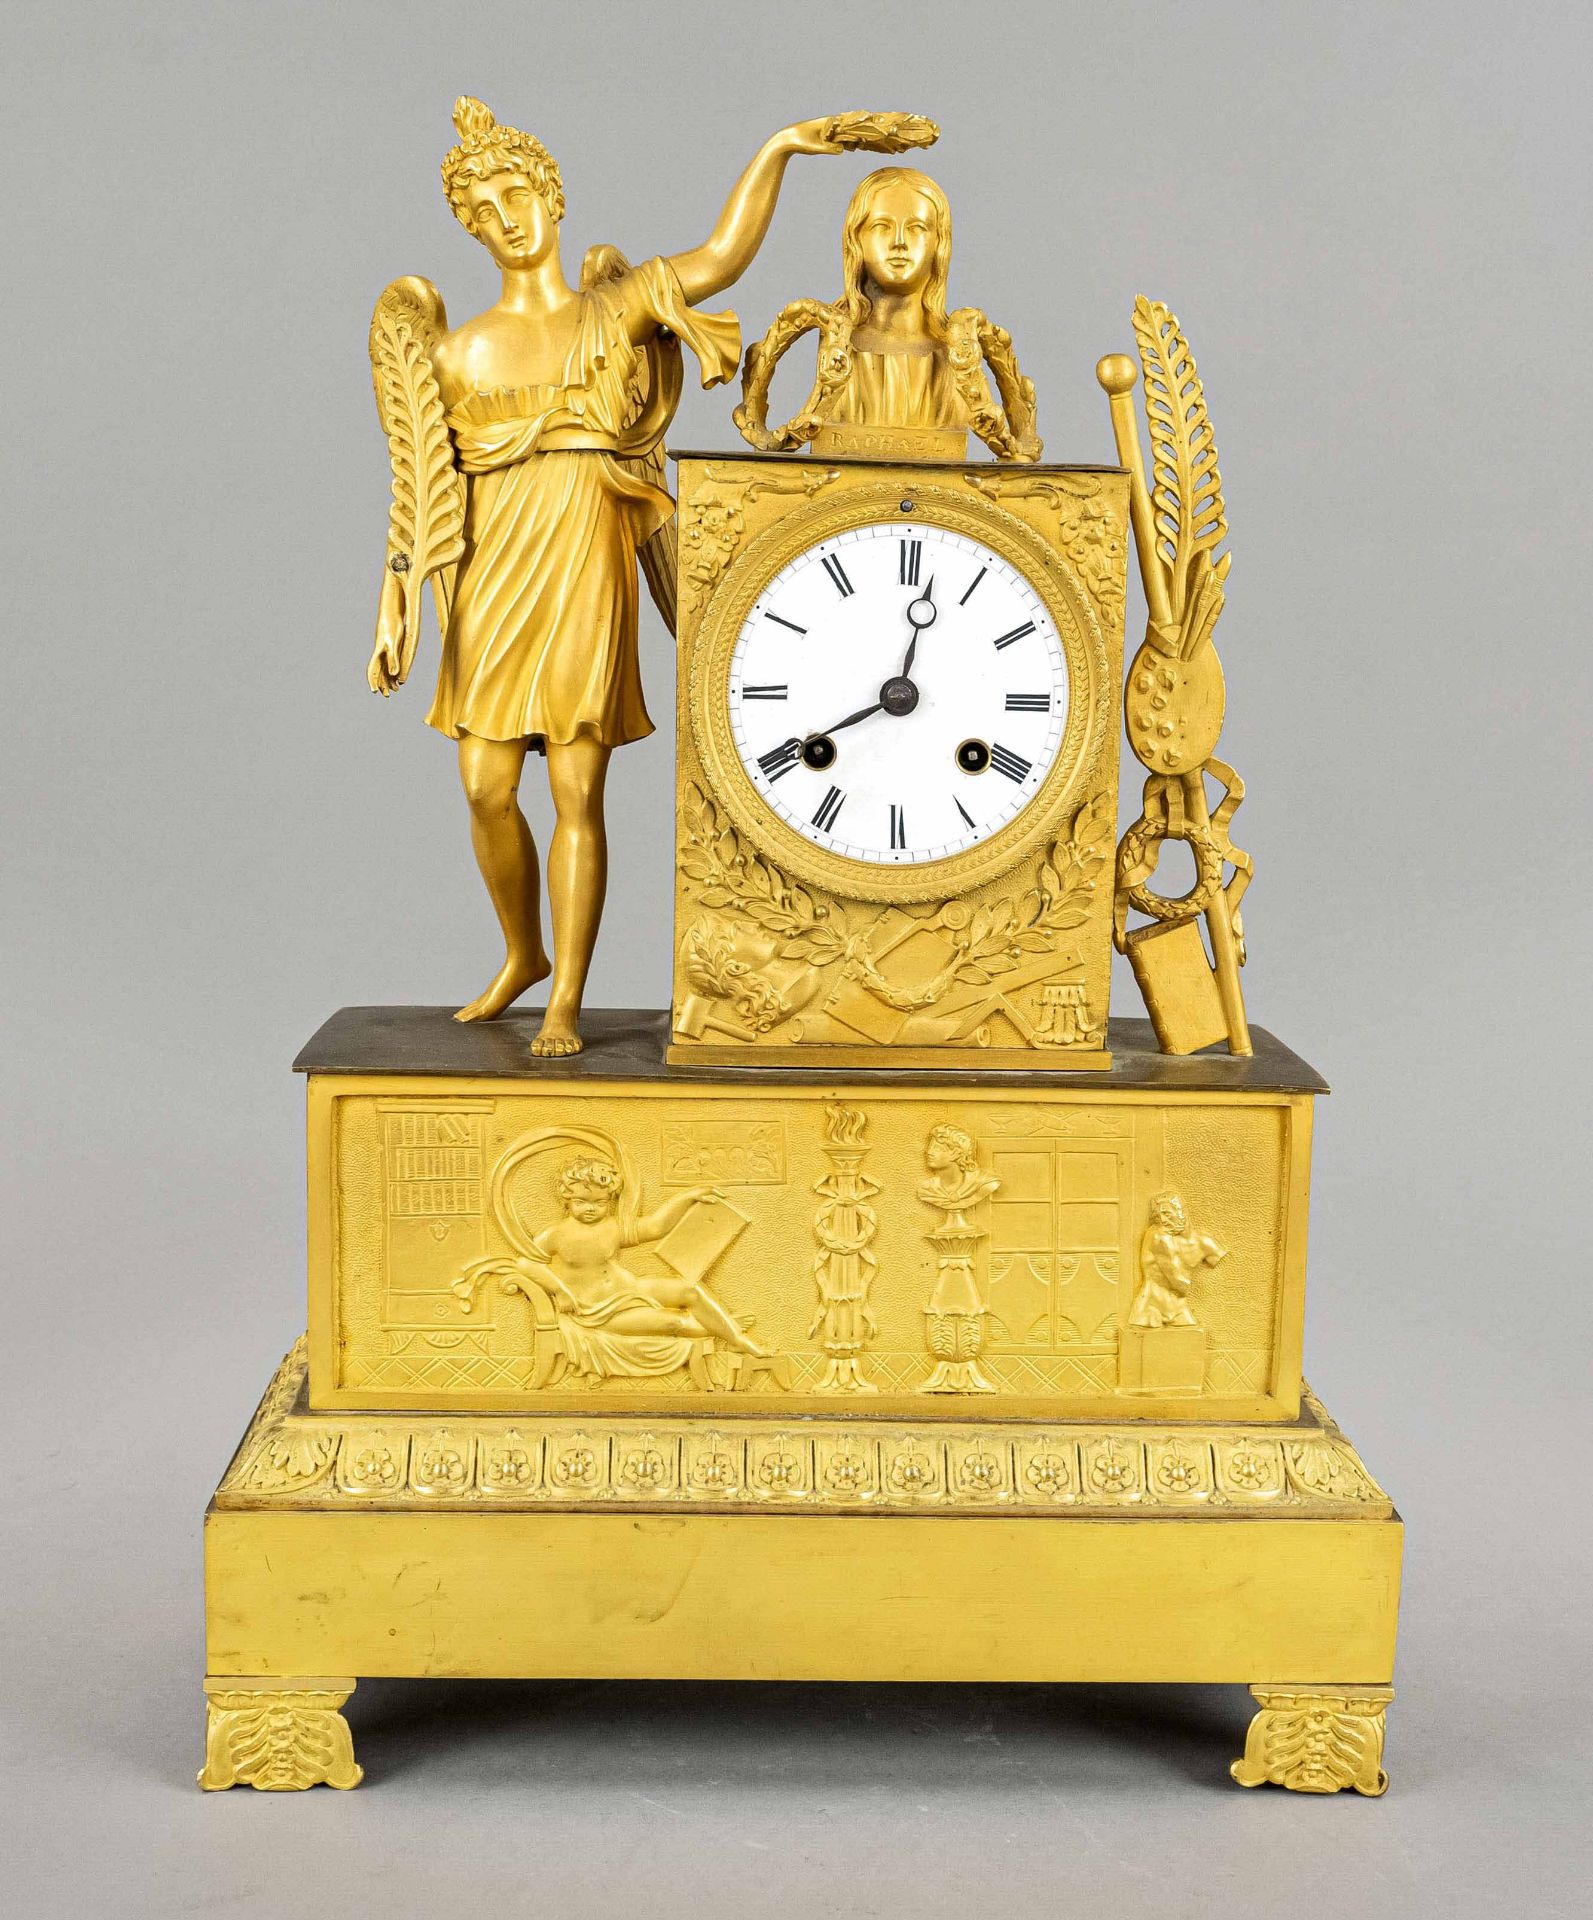 Empire pendulum, 2nd half of 19th century, fire gilded, in the base a putto surrounded by signs of